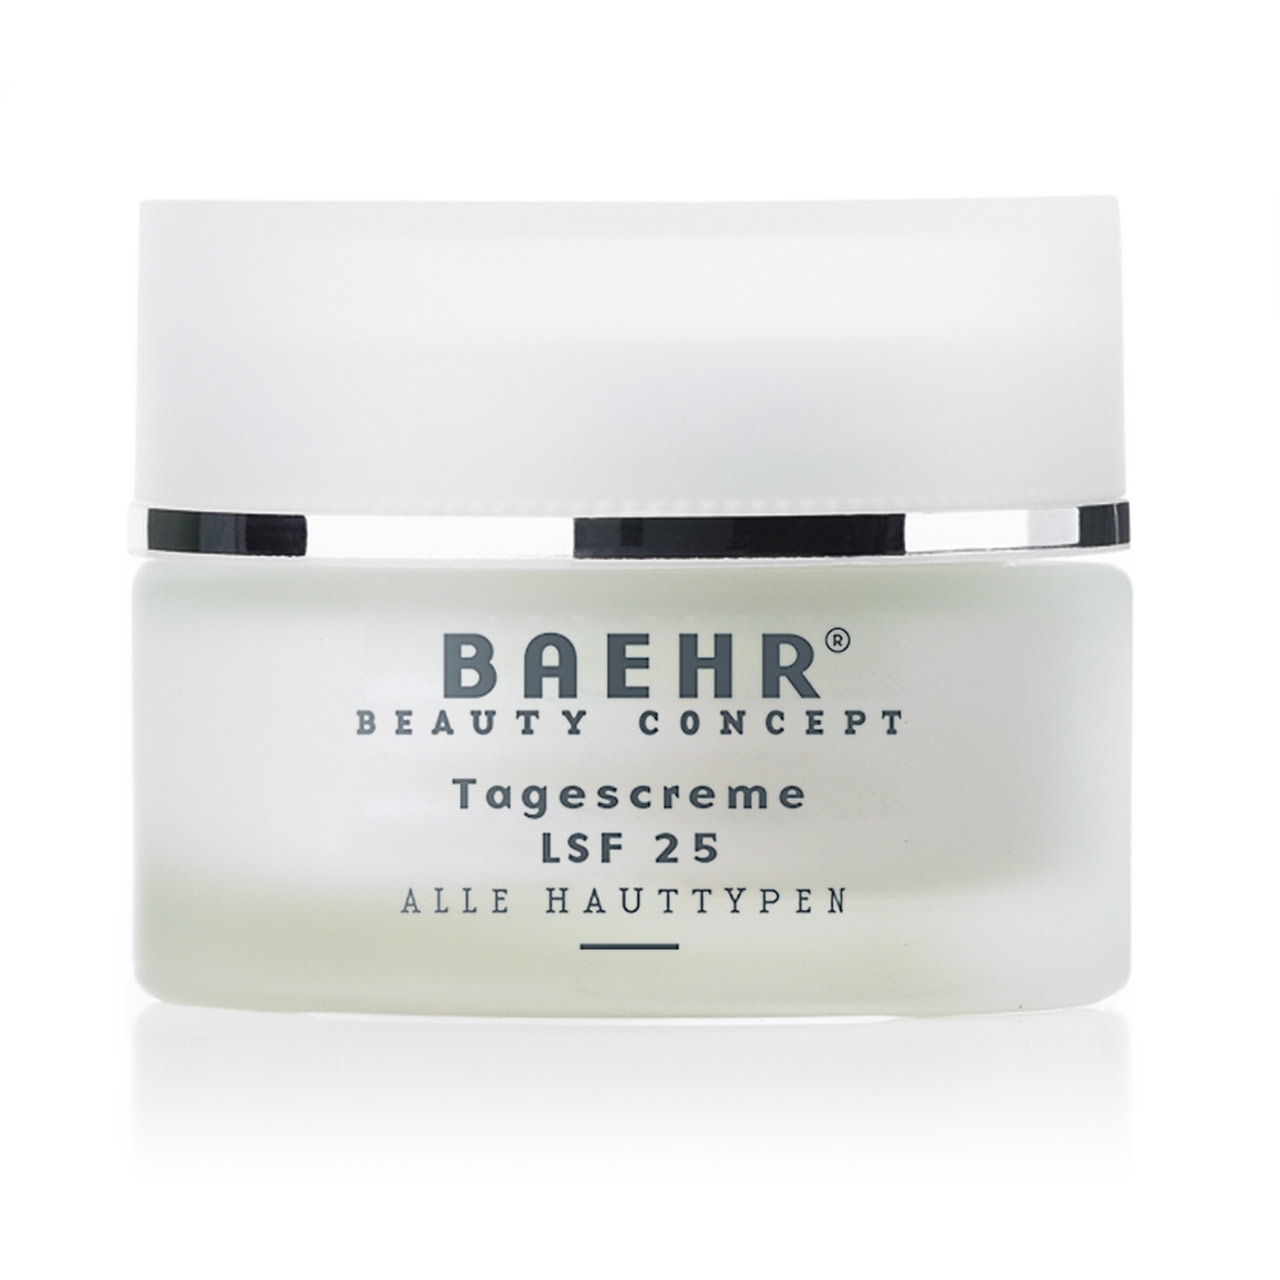 BAEHR BEAUTY CONCEPT - Tagescreme LSF 25, 50 ml